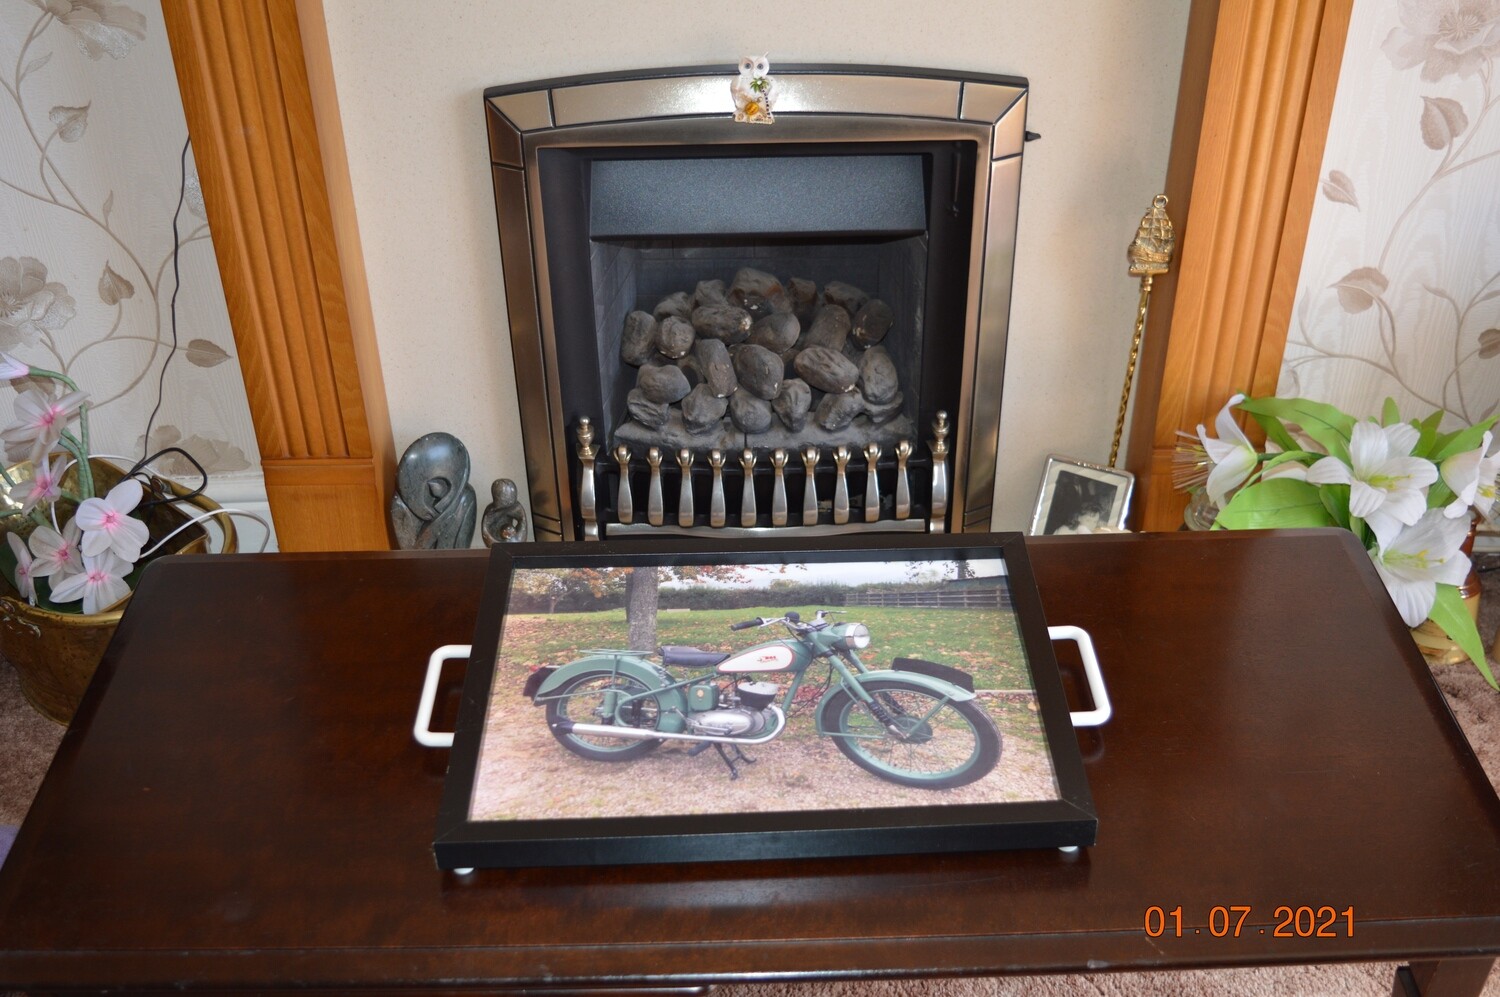 UNIVERSAL LAP and TABLE TRAYS 40cm x 30cm Special Price £31.95 after event £45.95